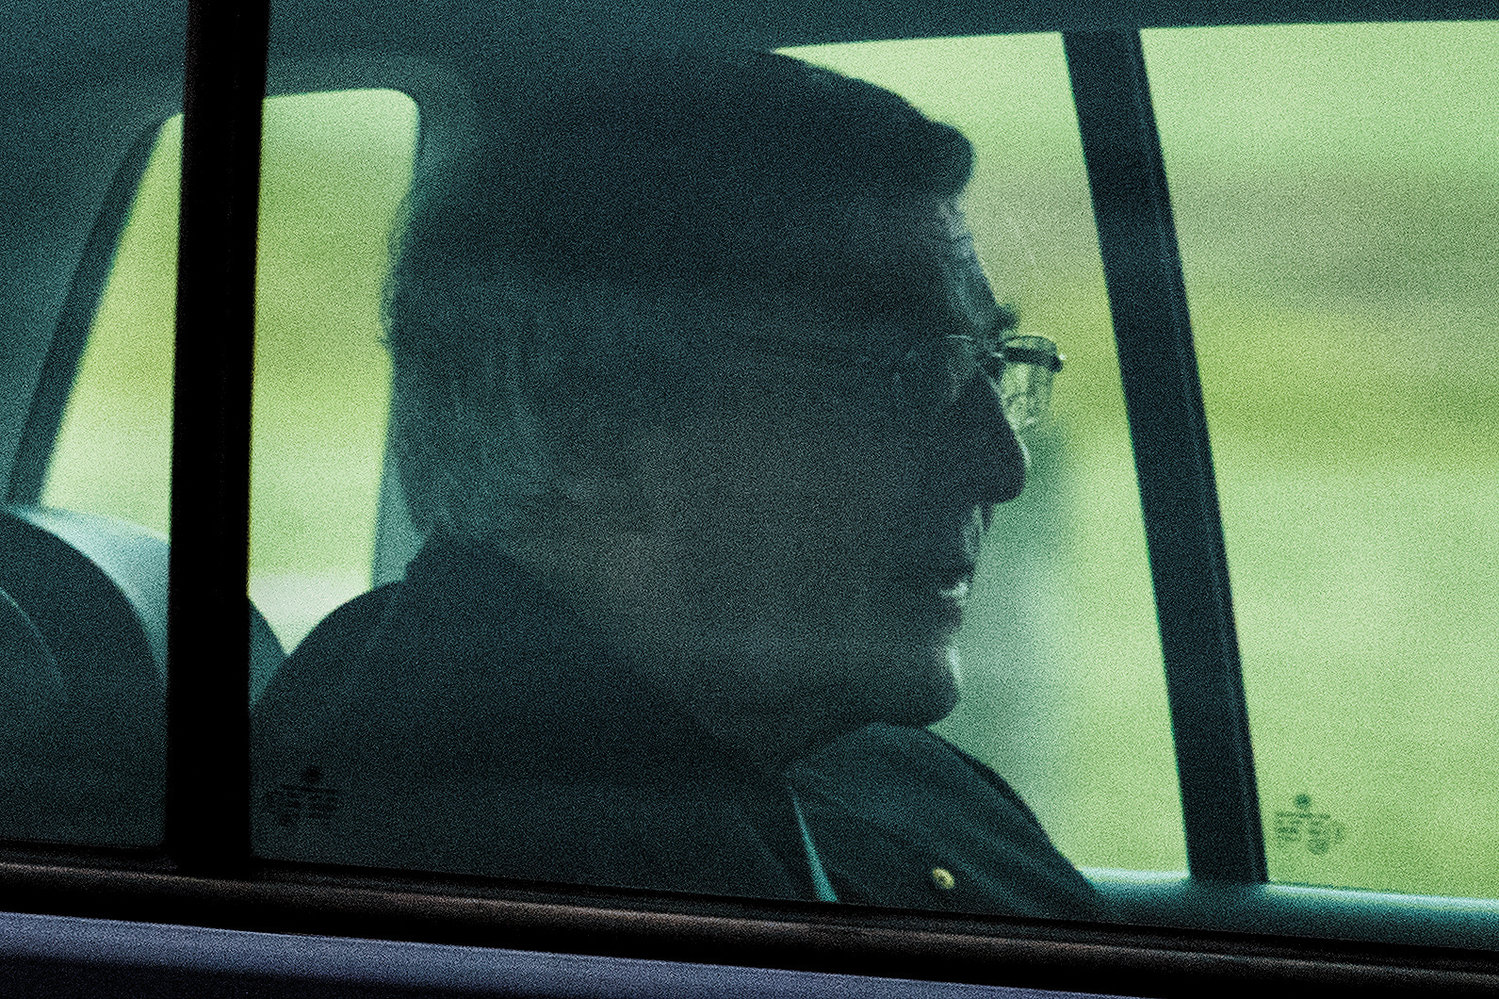 ACQUITTED—Cardinal George Pell is seen in a car after being released from Barwon prison in Geelong, Australia, April 7.